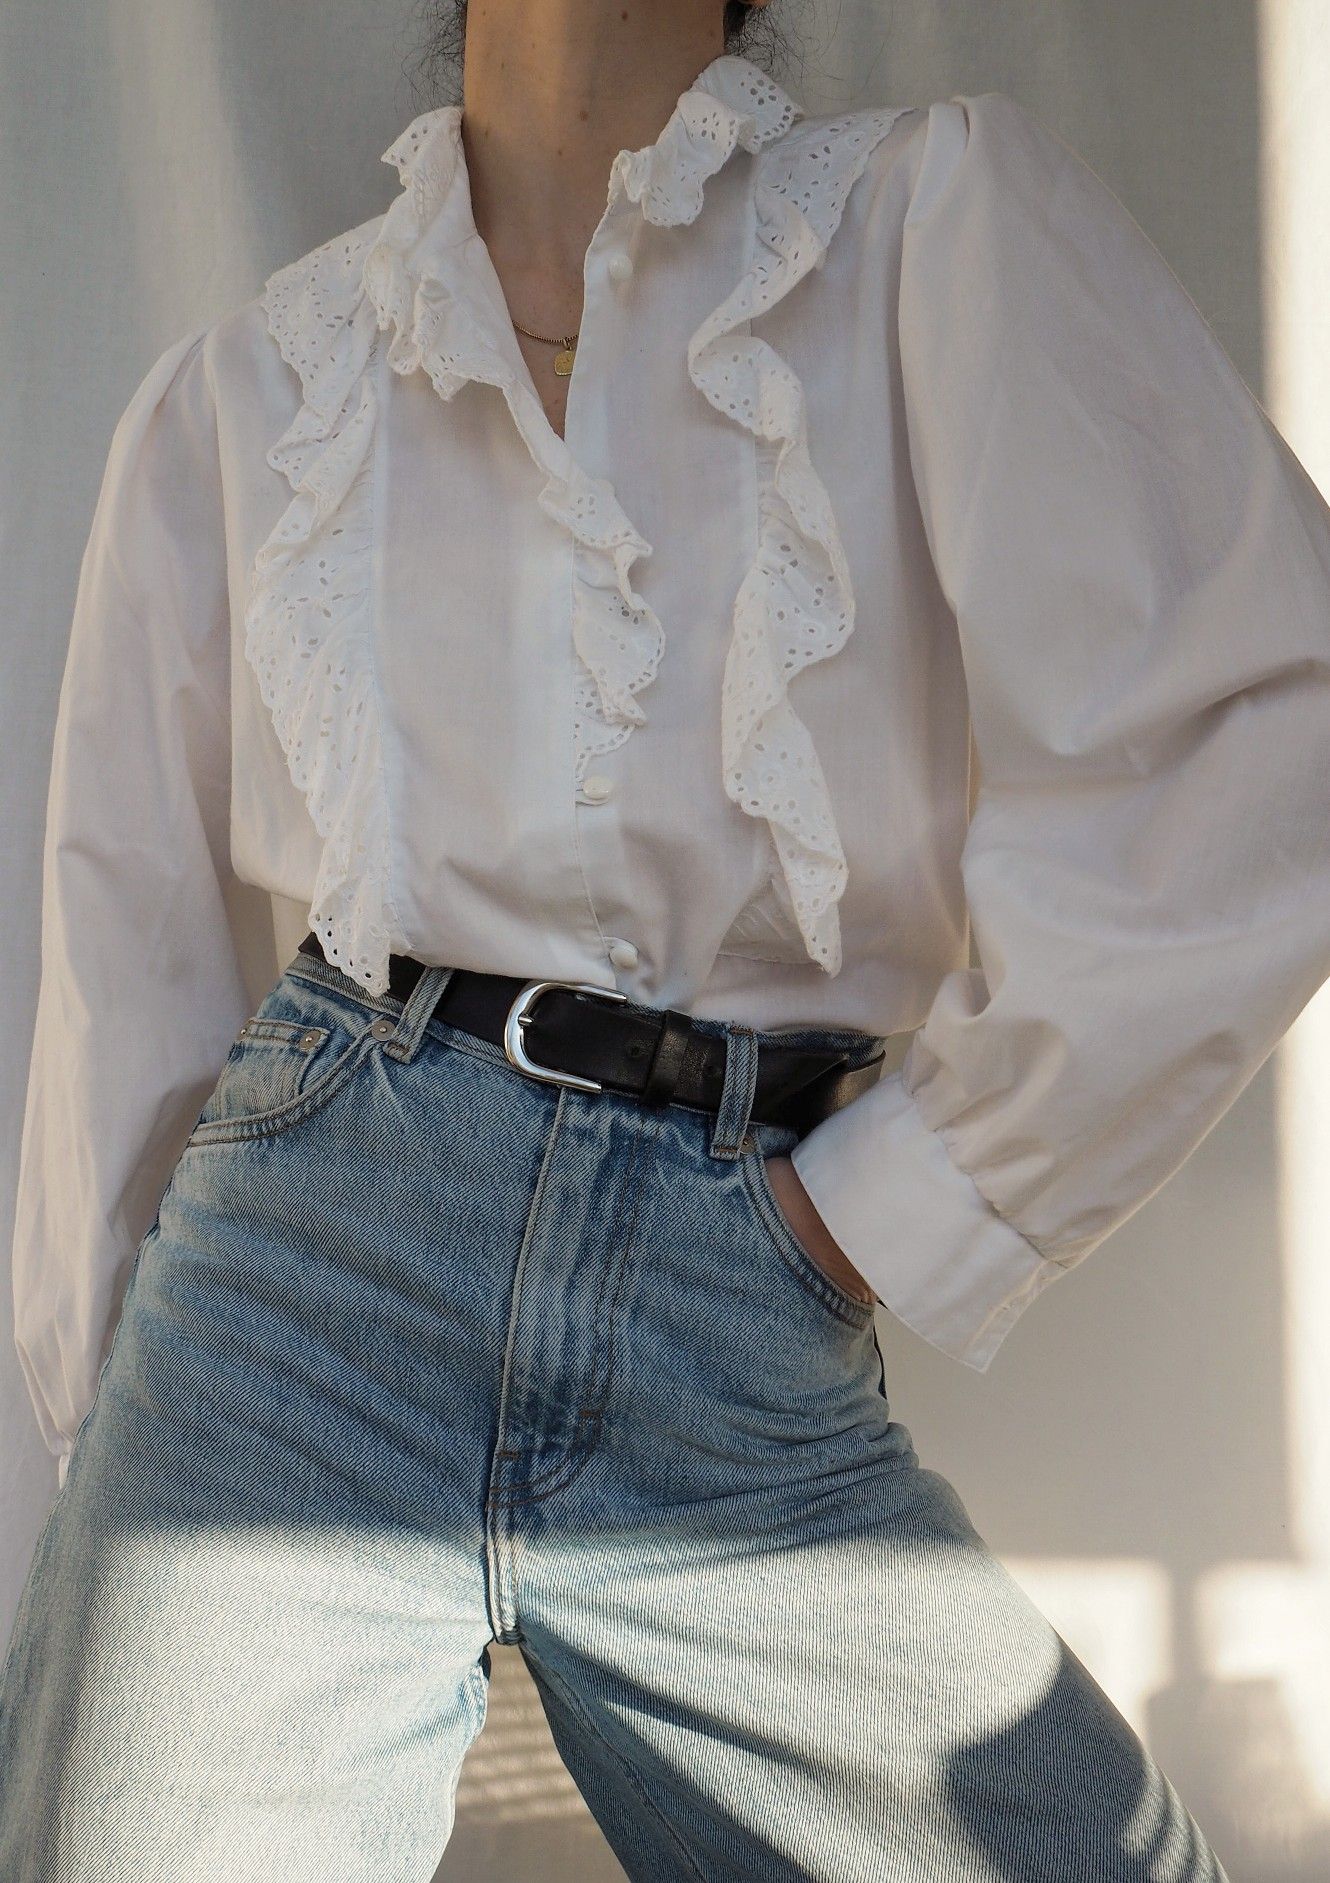 How to Style Ruffle Shirt: 15 Super Chic Looks for Women